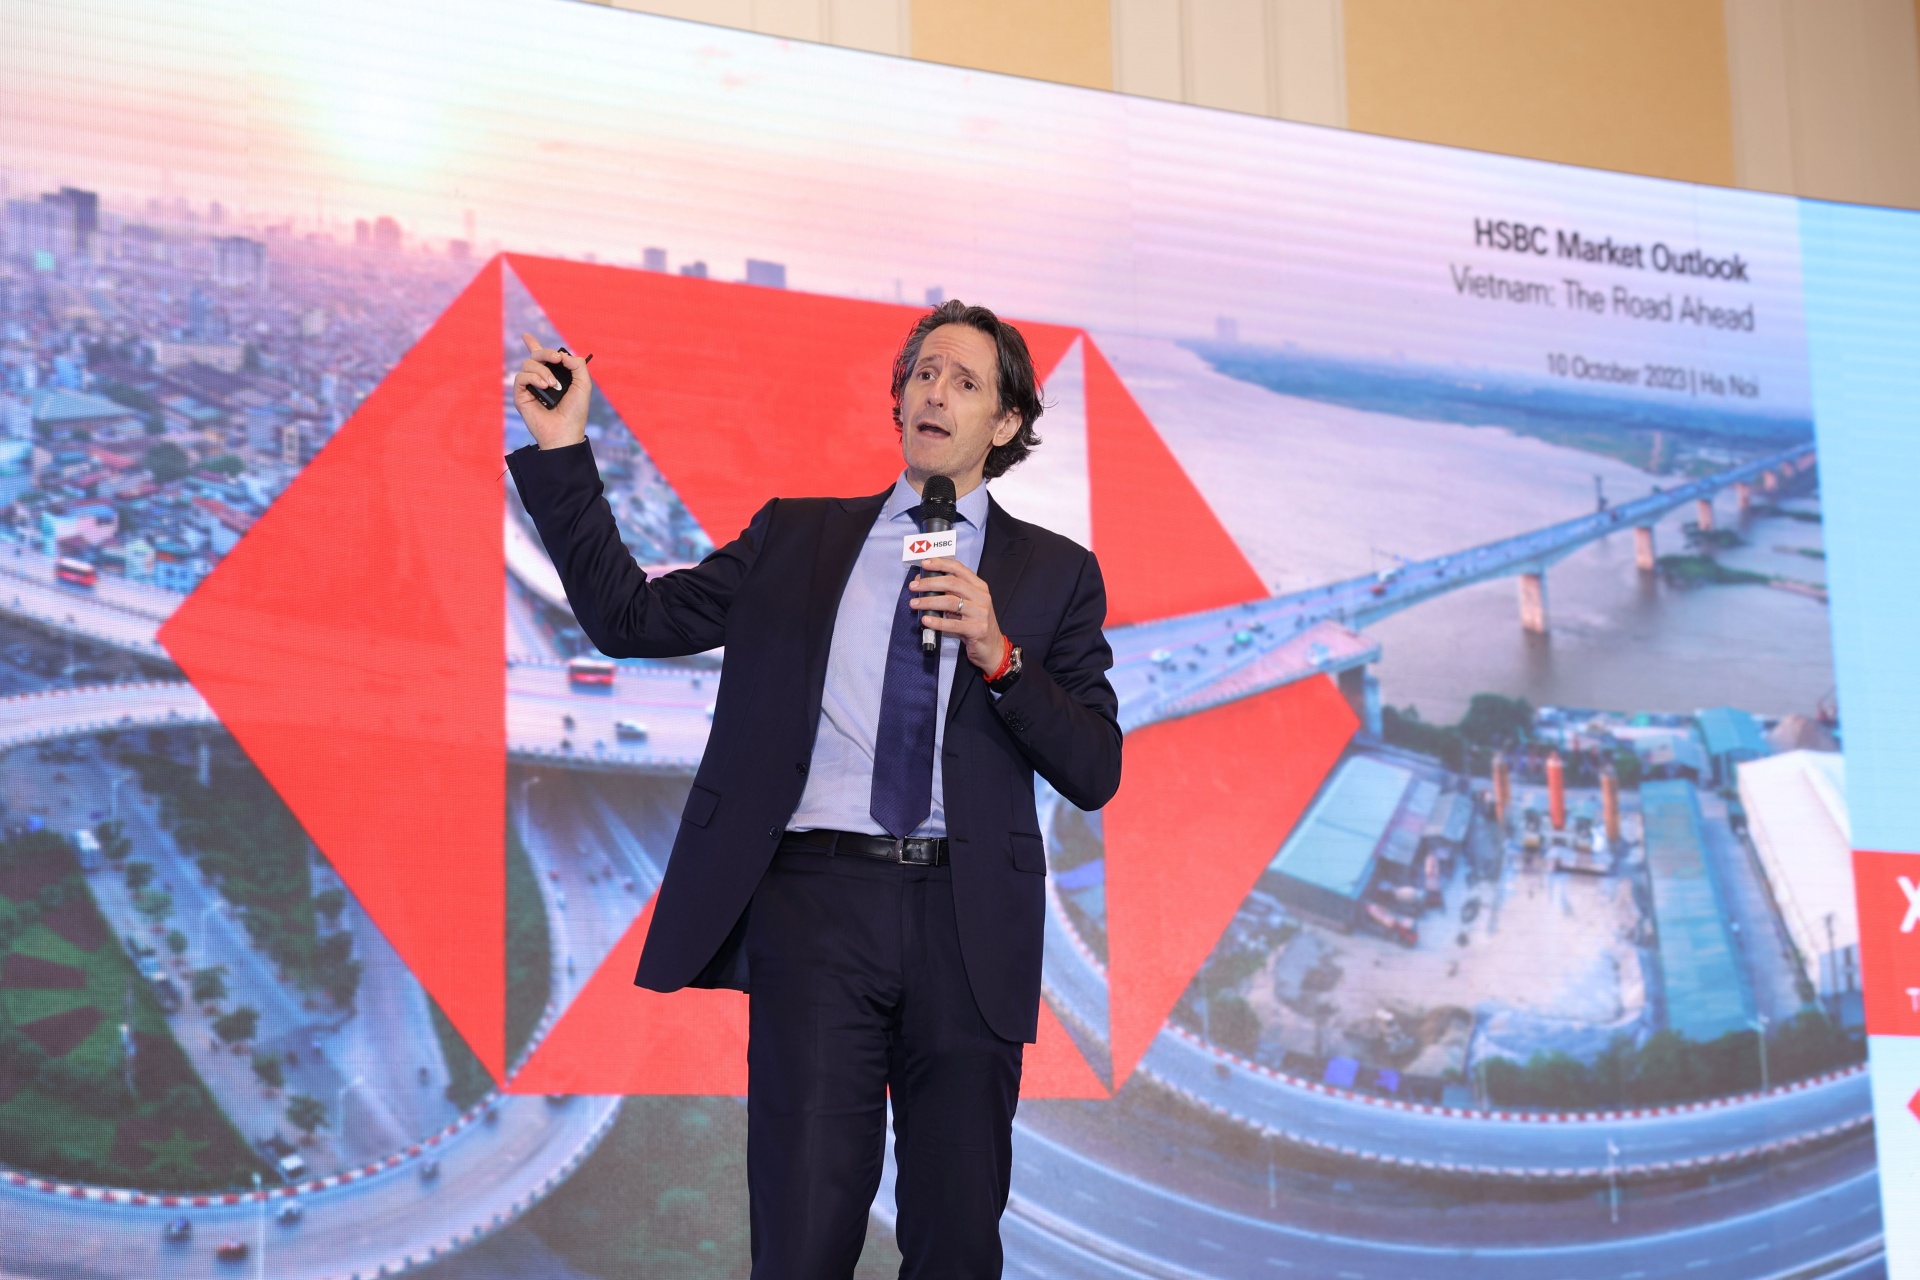 HSBC holds event on Vietnam business outlook